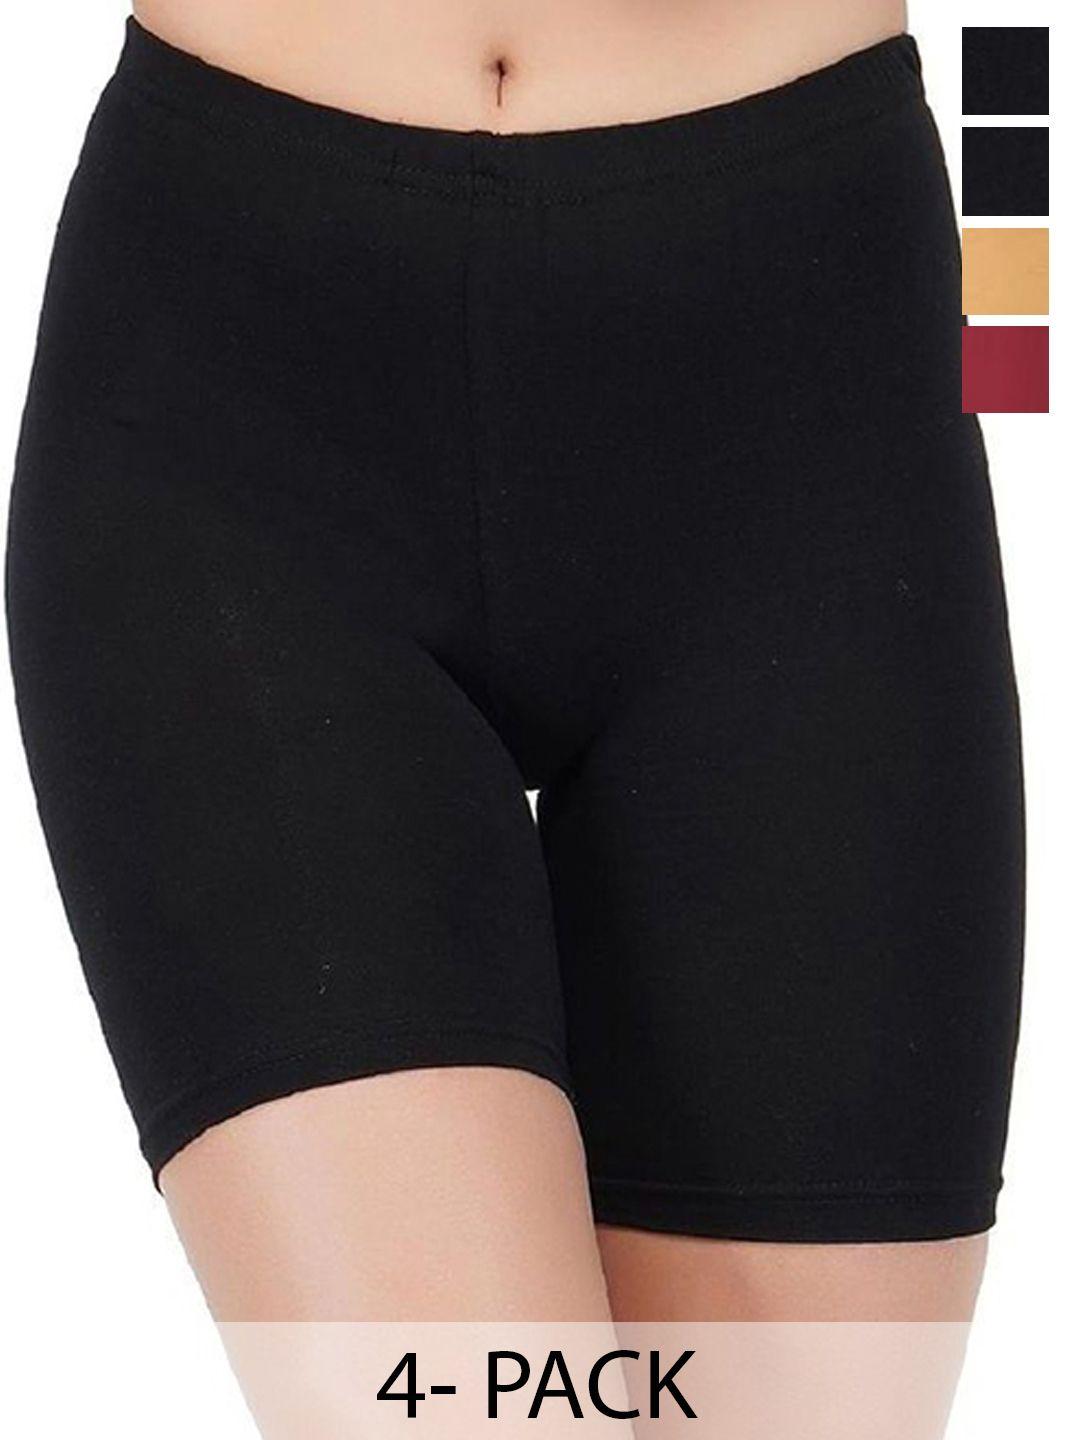 arla apparel pack of 4 underskirt cycling shorts